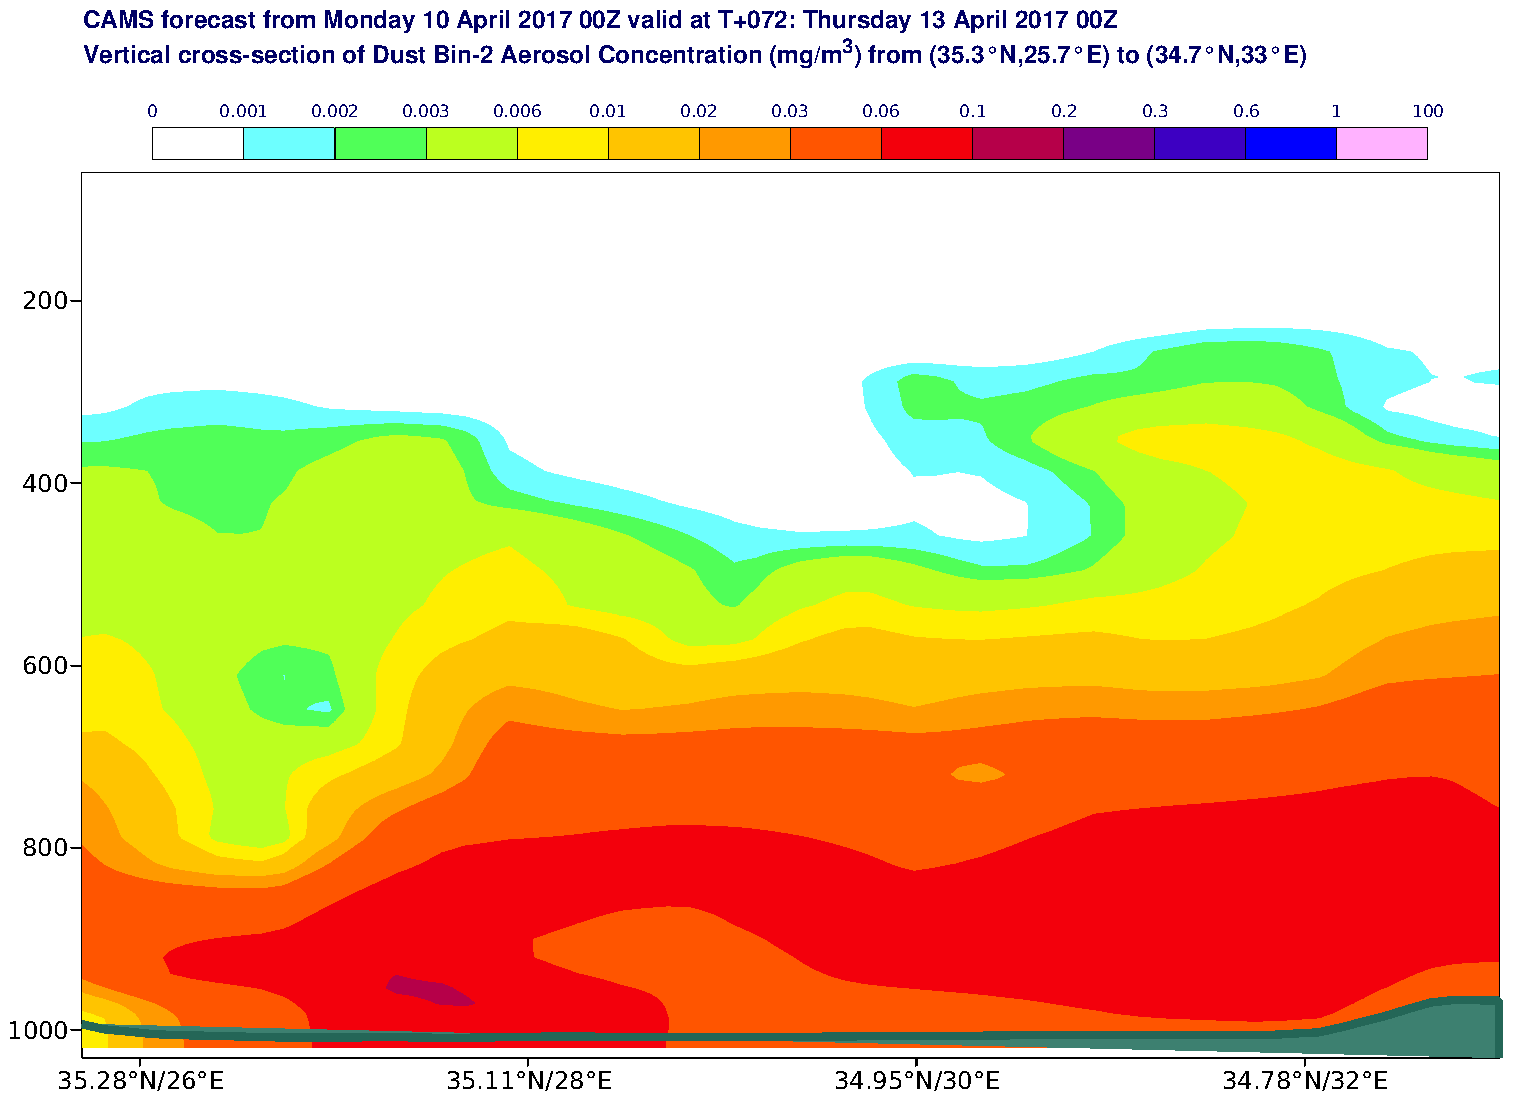 Vertical cross-section of Dust Bin-2 Aerosol Concentration (mg/m3) valid at T72 - 2017-04-13 00:00